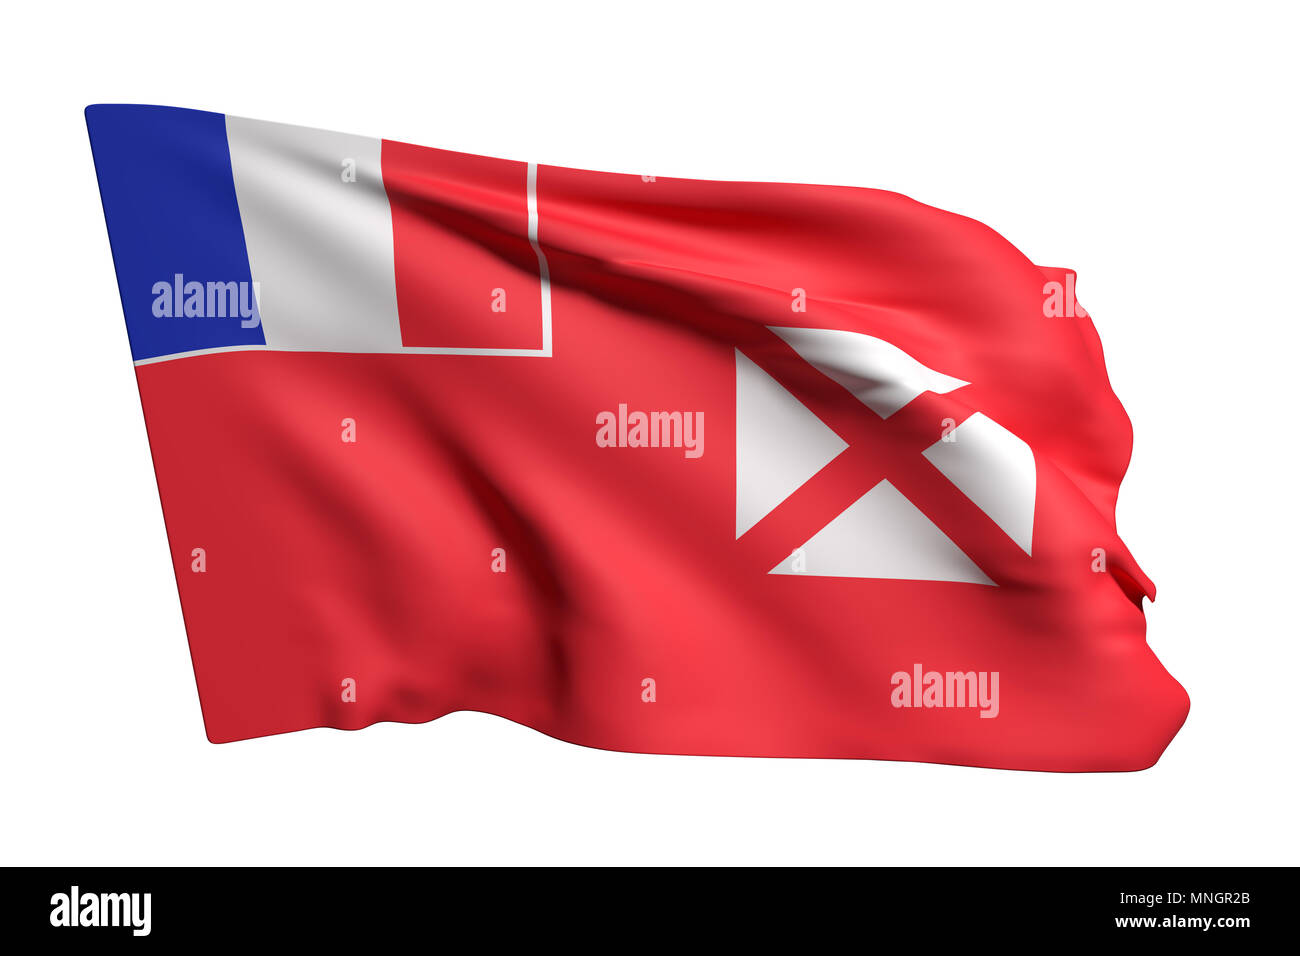 3d rendering of Territory of the Wallis and Futuna Islands flag waving on white background Stock Photo